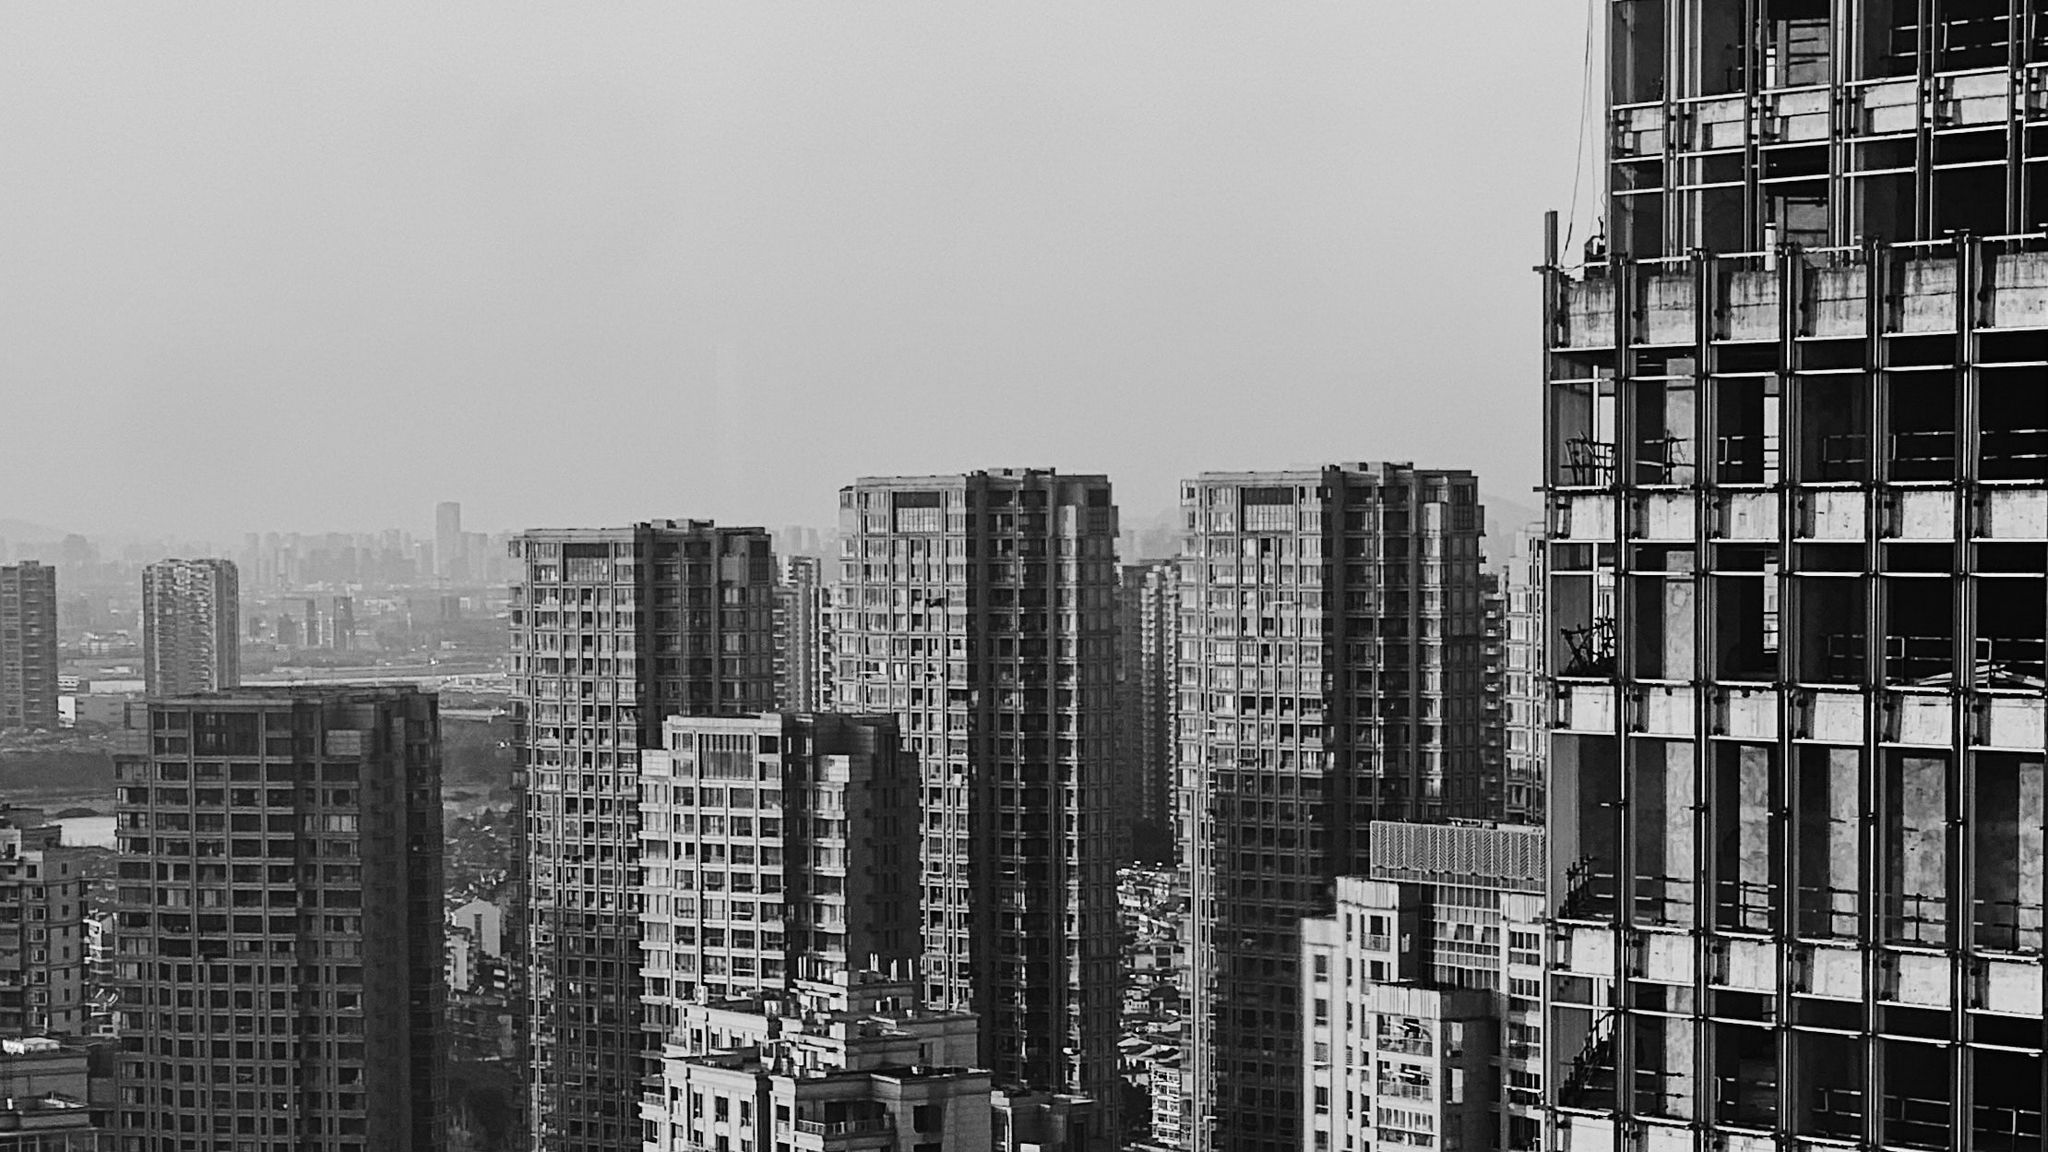 Download wallpaper 2048x1152 city, buildings, aerial view, bw ultrawide ...